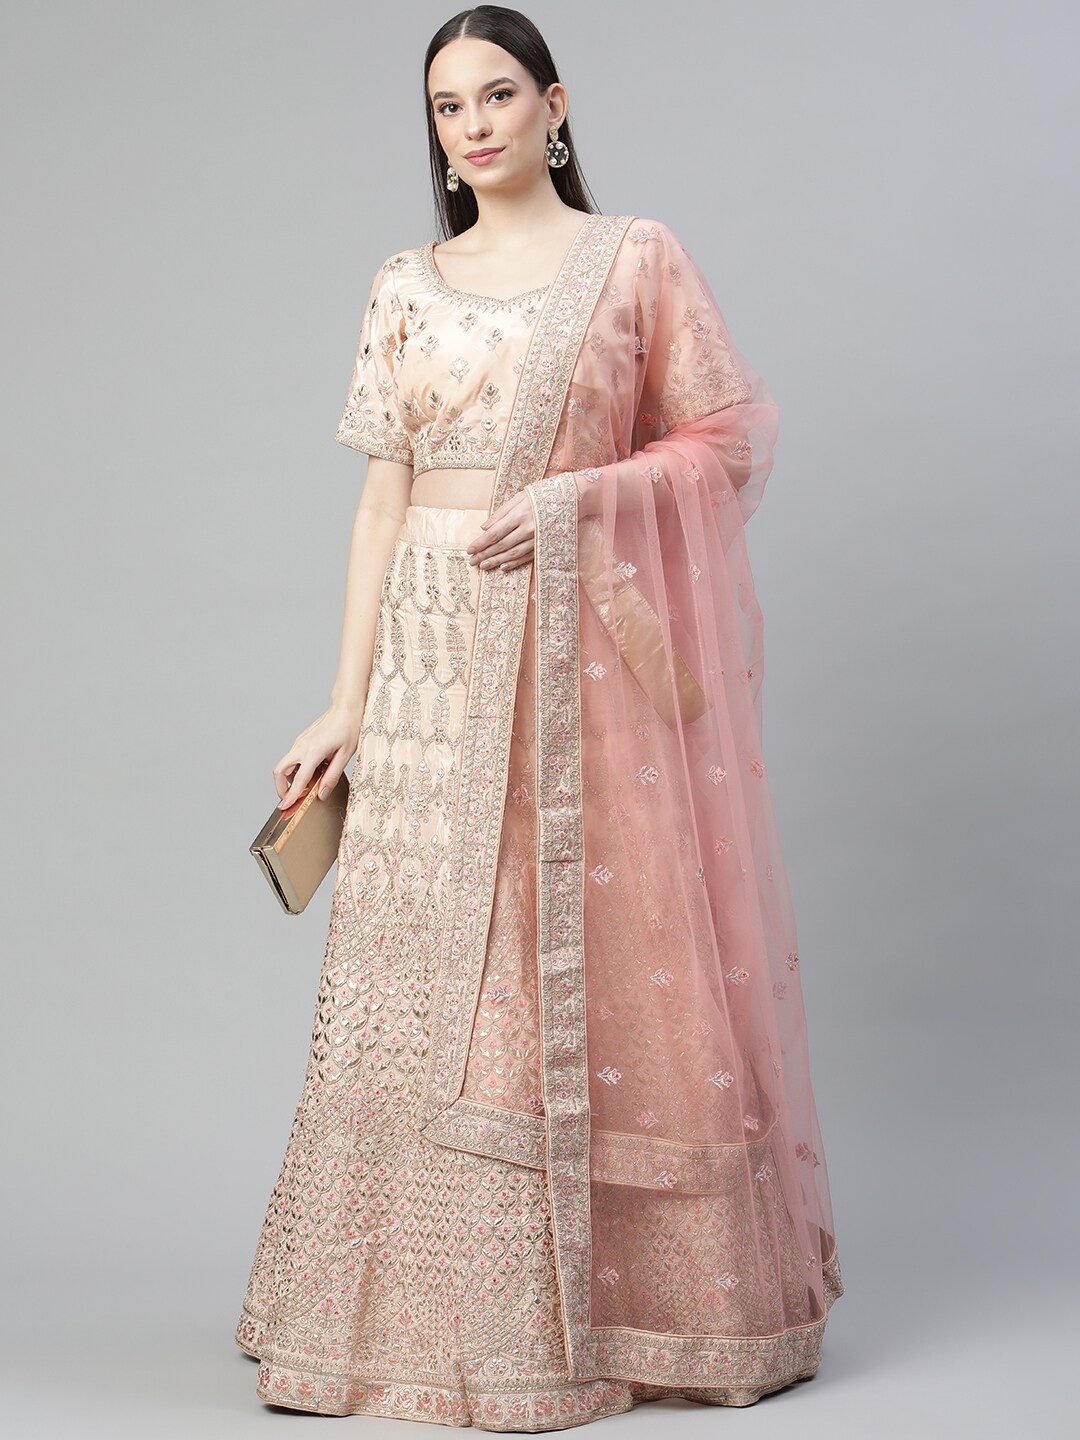 Readiprint Fashions Peach-Coloured & Pink Embroidered Semi-Stitched Lehenga & Unstitched Blouse With Dupatta Price in India